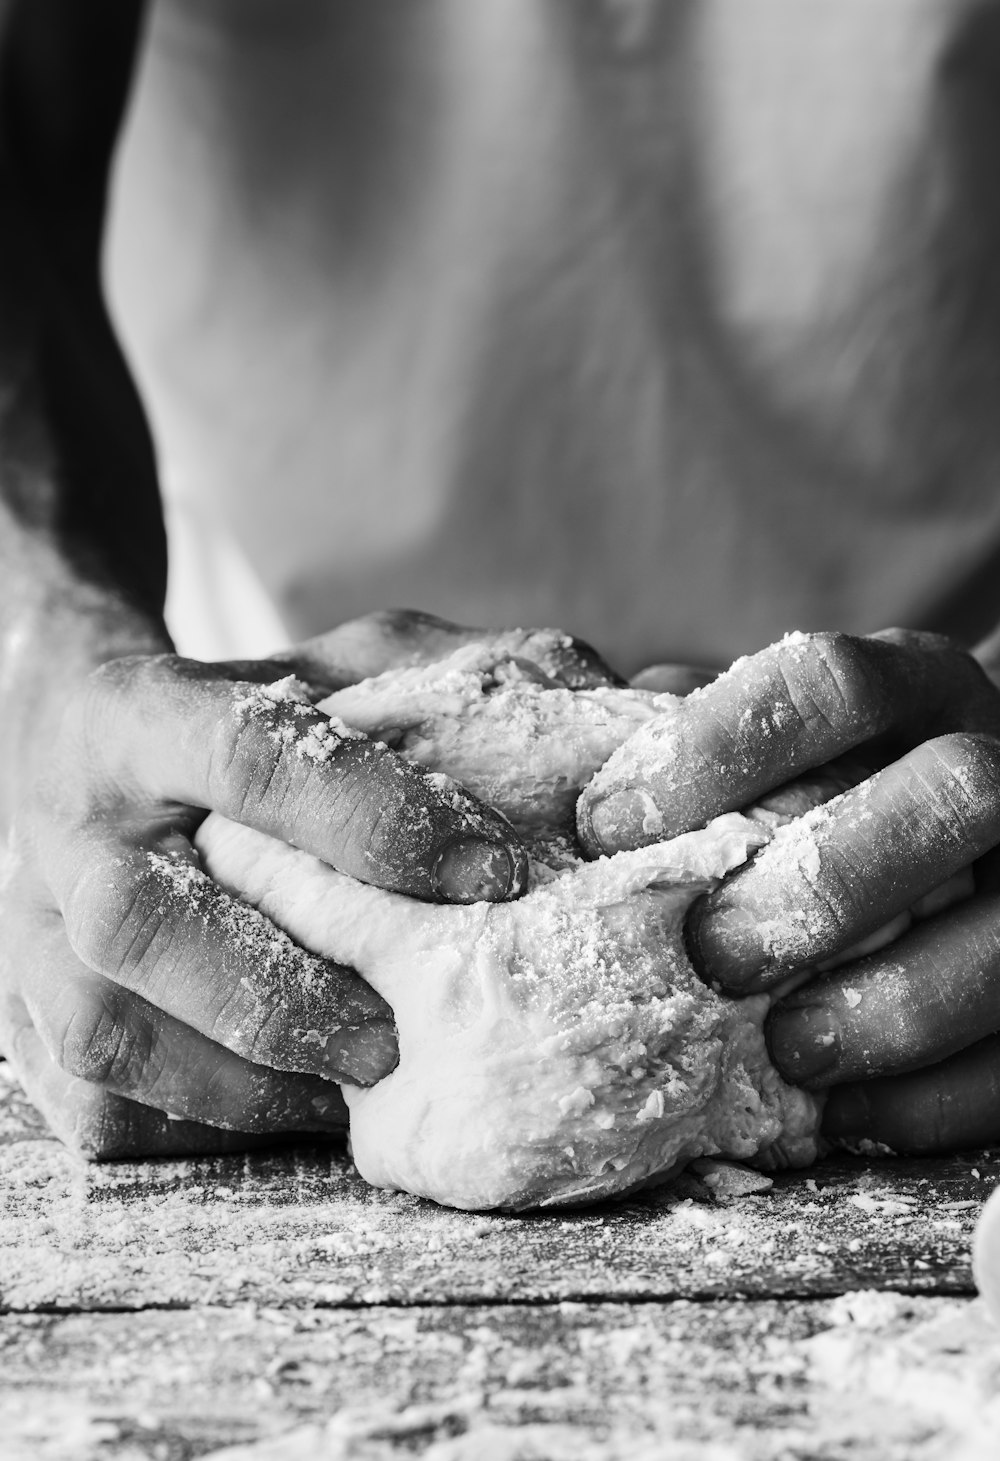 a black and white photo of a person kneading dough